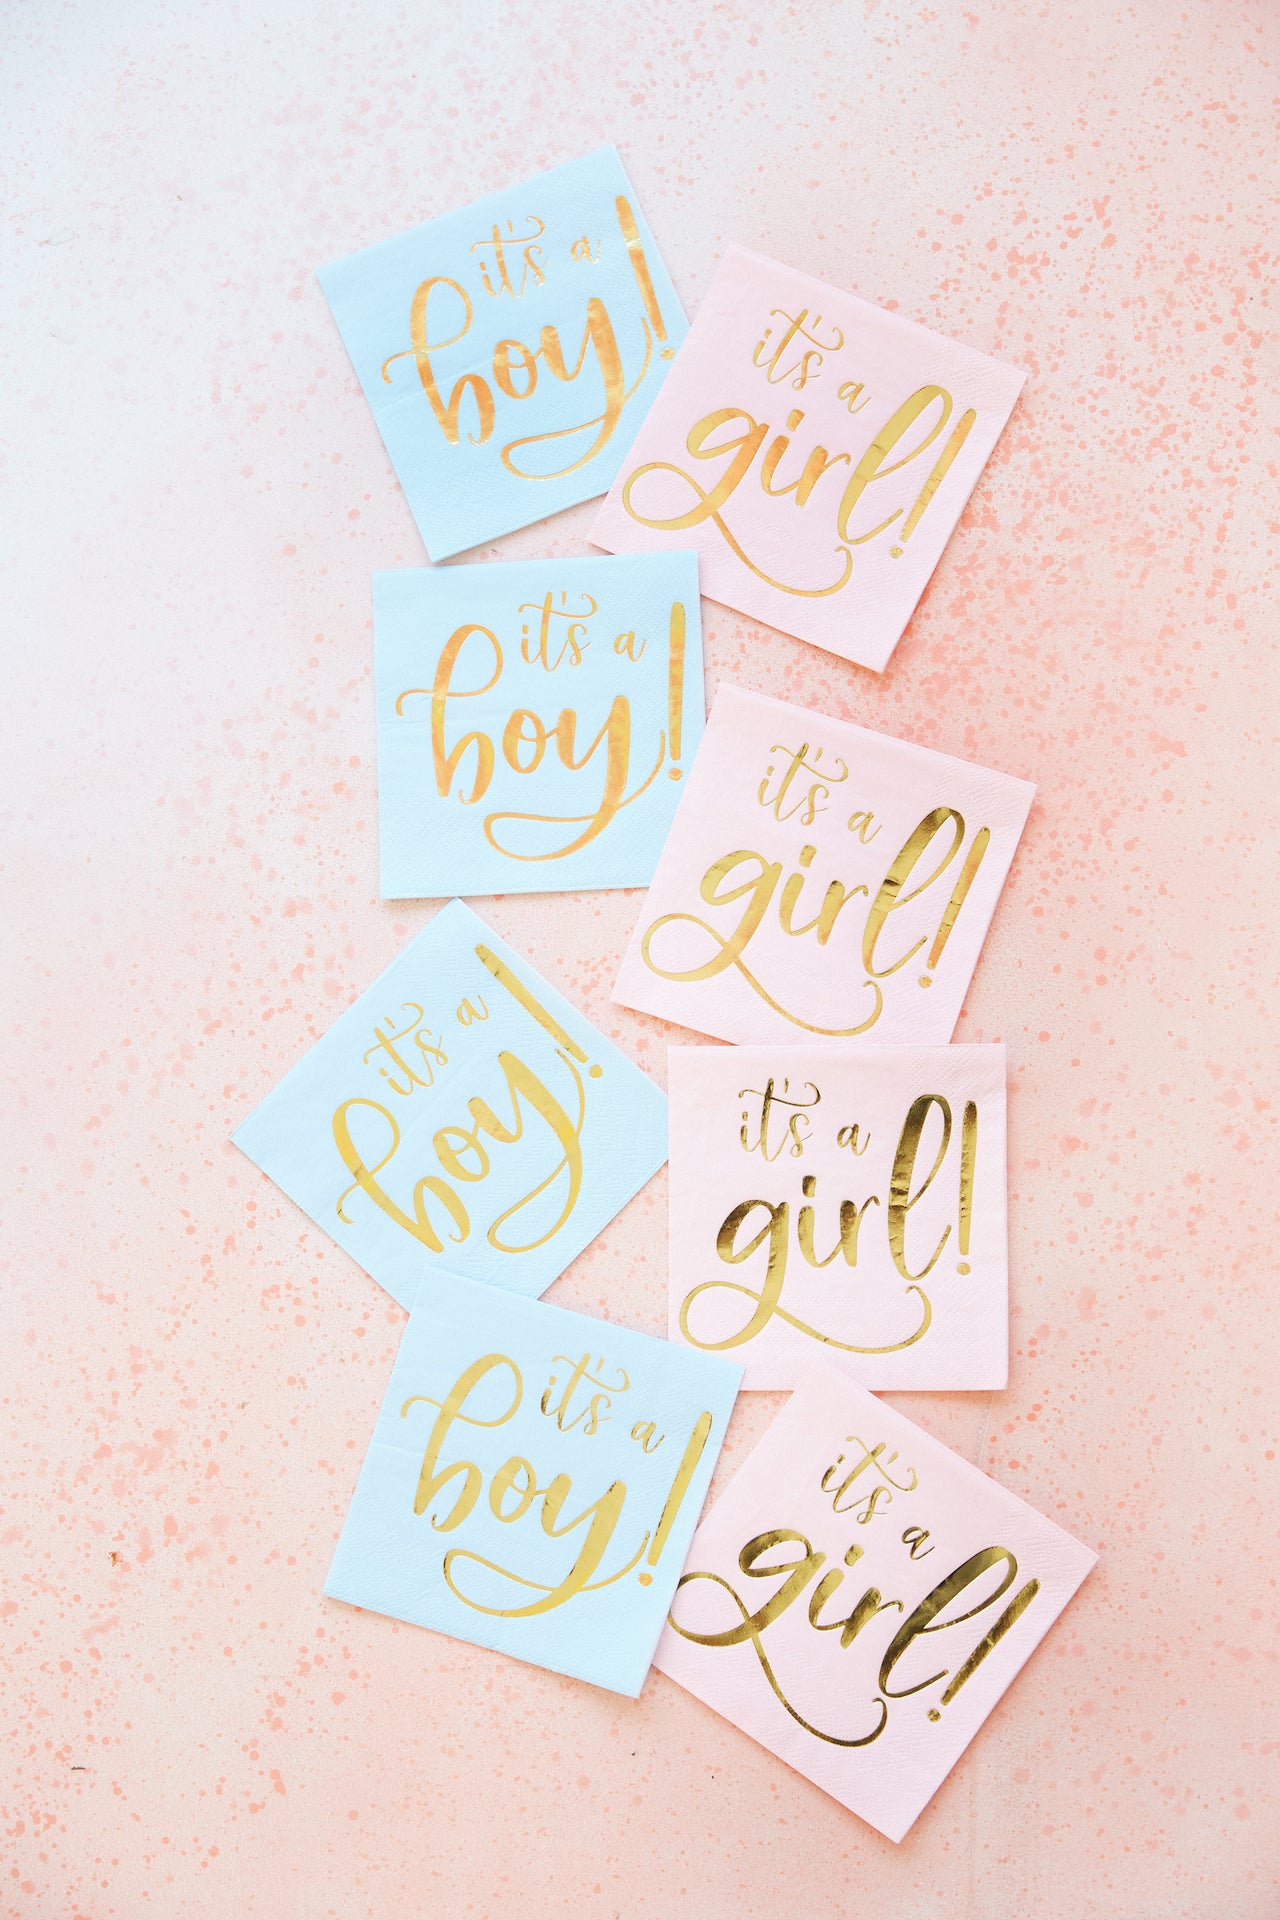 It's a boy and it's a girl napkins.